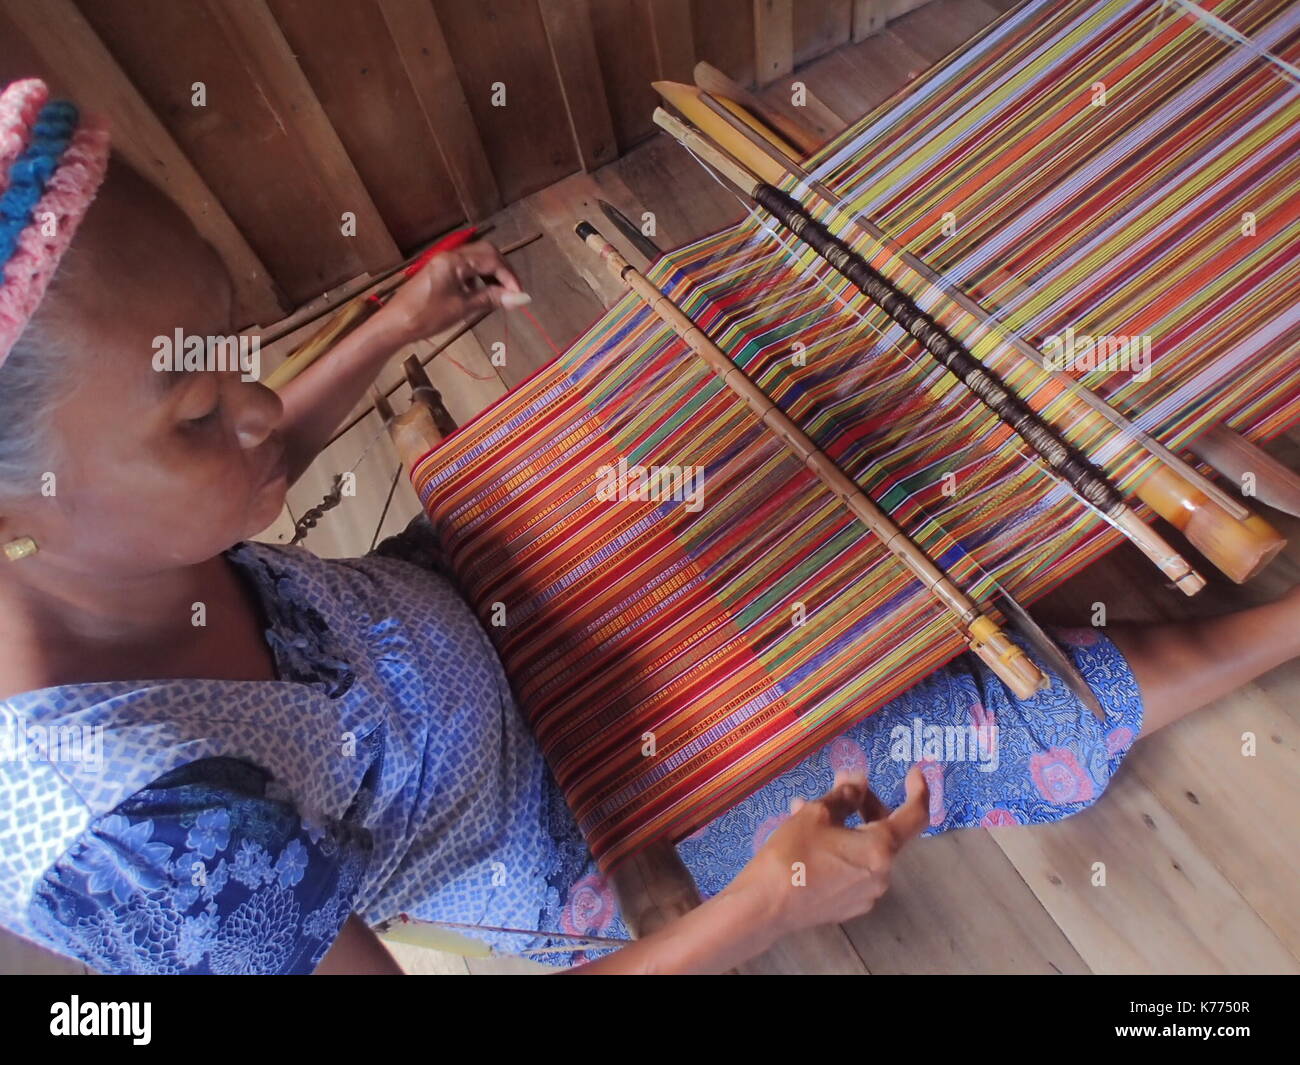 Lamitan City, Philippines. 14th Sep, 2017. Gigi, a 39 years old Yakan woman weaving a 21 meters long cloth. She started weaving when she was 9 years old. The Yakan indigenous people of Lamitan, Basilan are known as intricate weavers of vibrant and colorful single handmade cloths. Jandina, a Yakan woman weaving a 21 meters long cloth. She's been doing this intricate job for more than 25 years. The Yakan indigenous people of Lamitan, Basilan are known as intricate weavers of vibrant and colorful single handmade cloths. Credit: Sherbien Dacalanio/Pacific Press/Alamy Live News Stock Photo